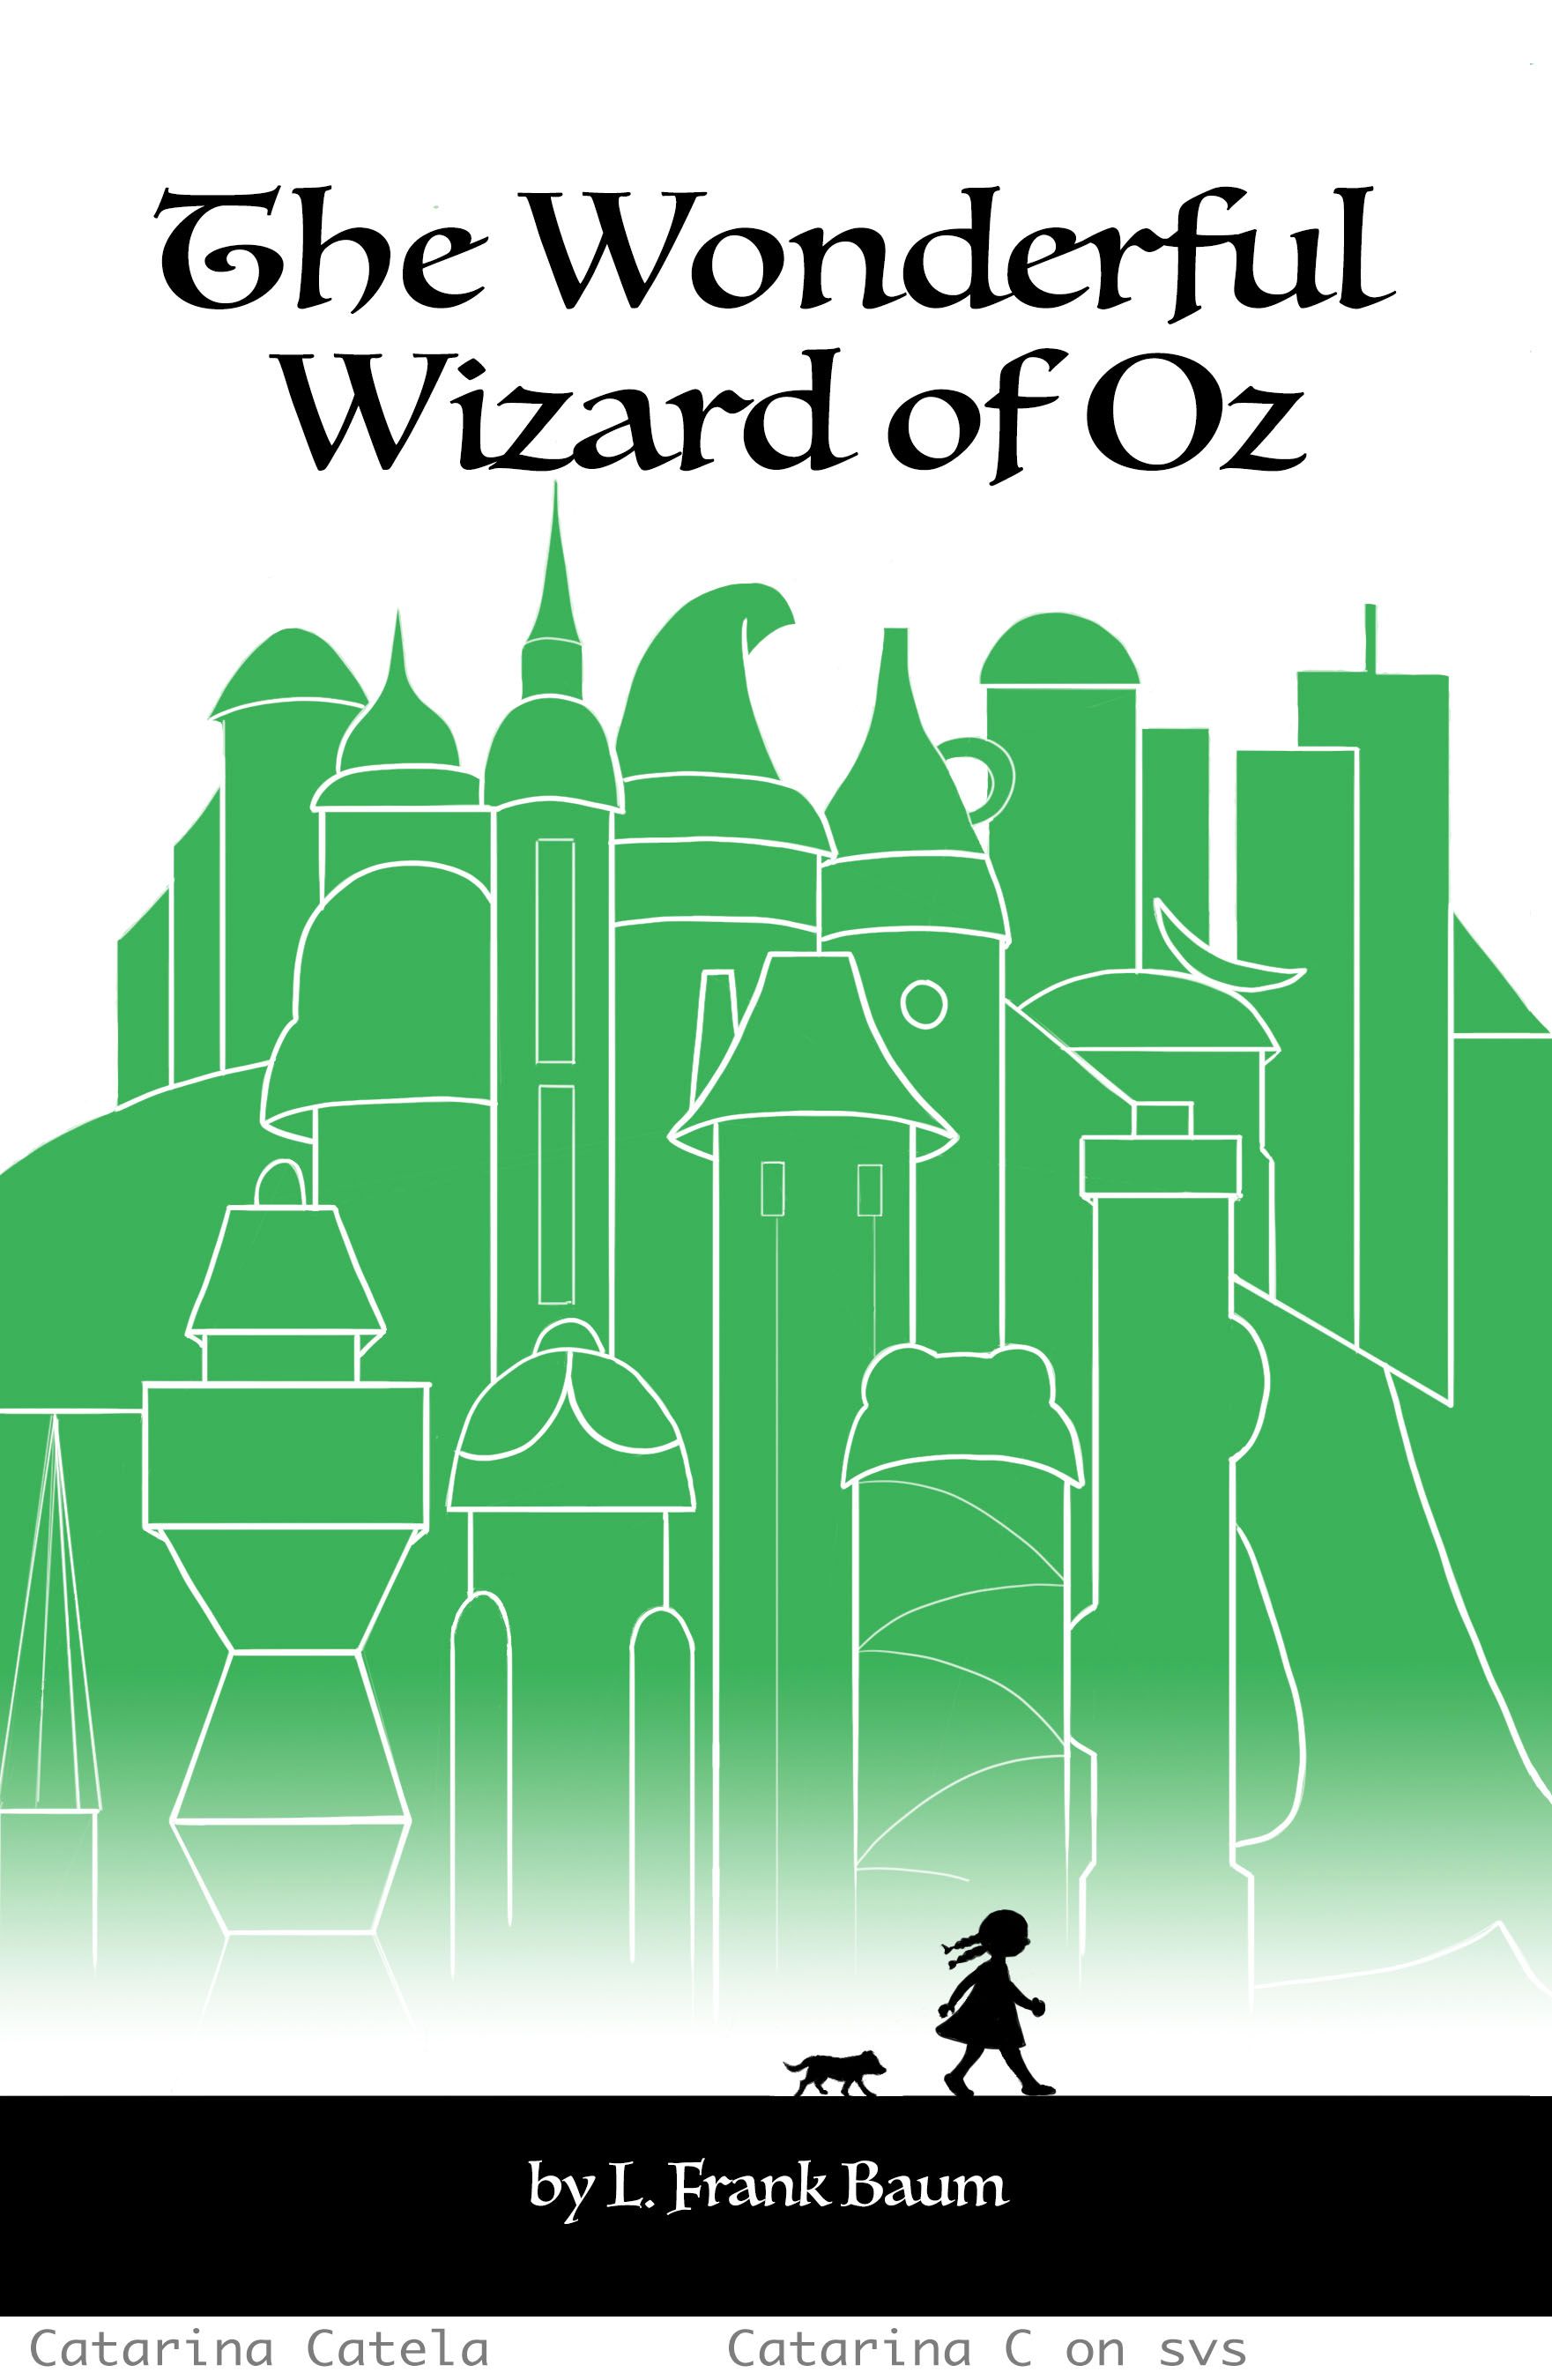 Wizard of Oz cover.jpg